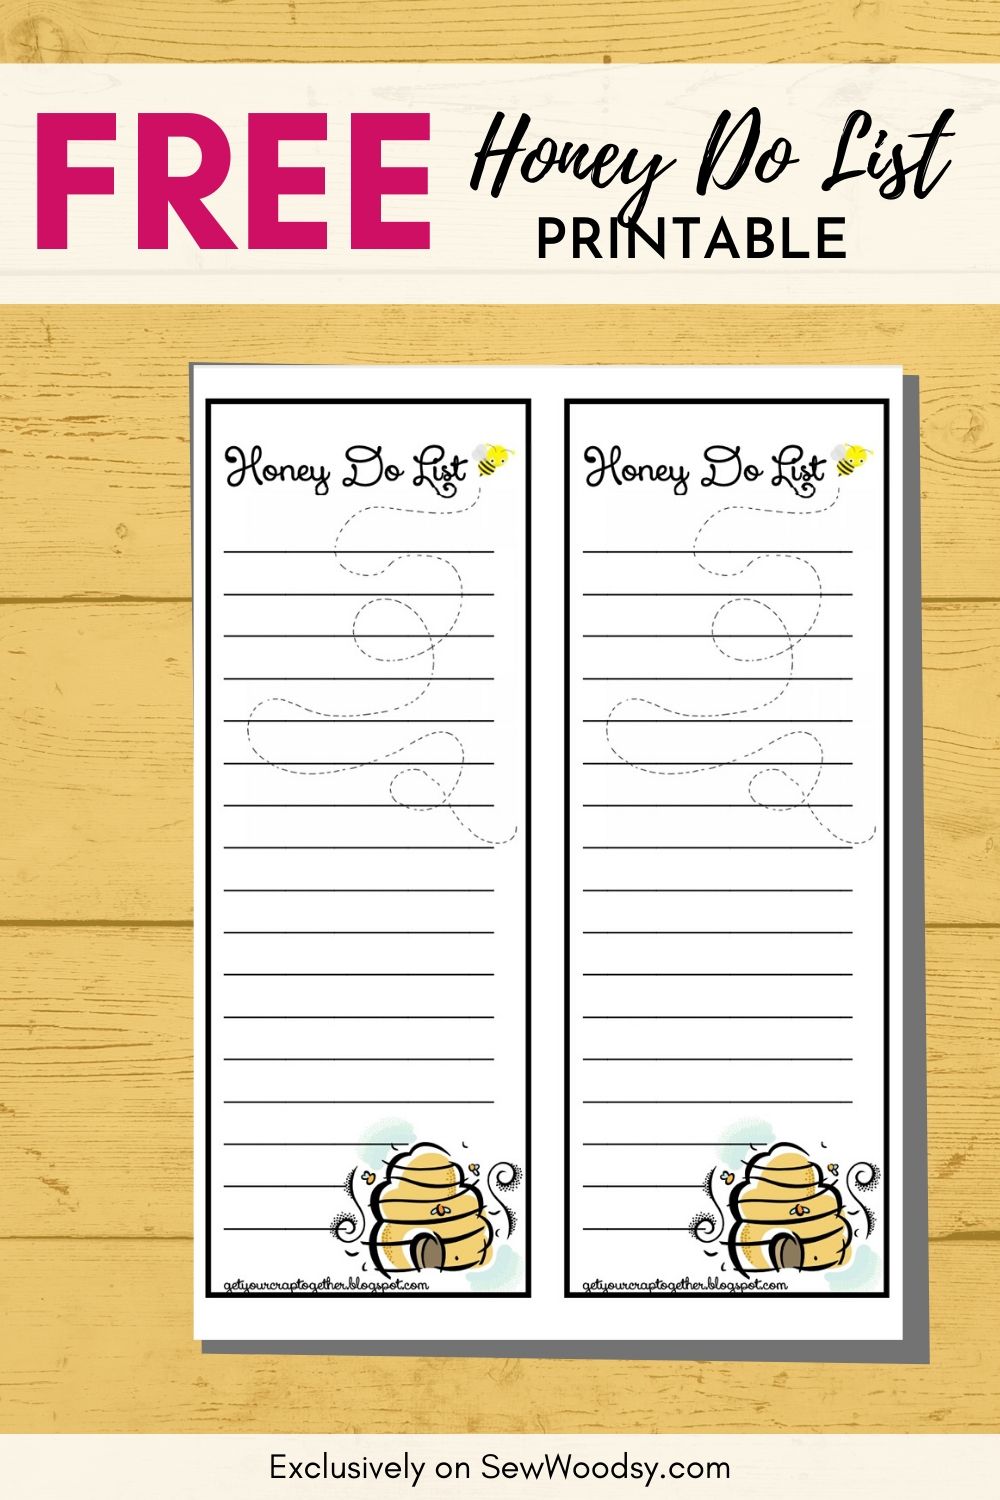 Image of the Free Printable Honey Do List with text.